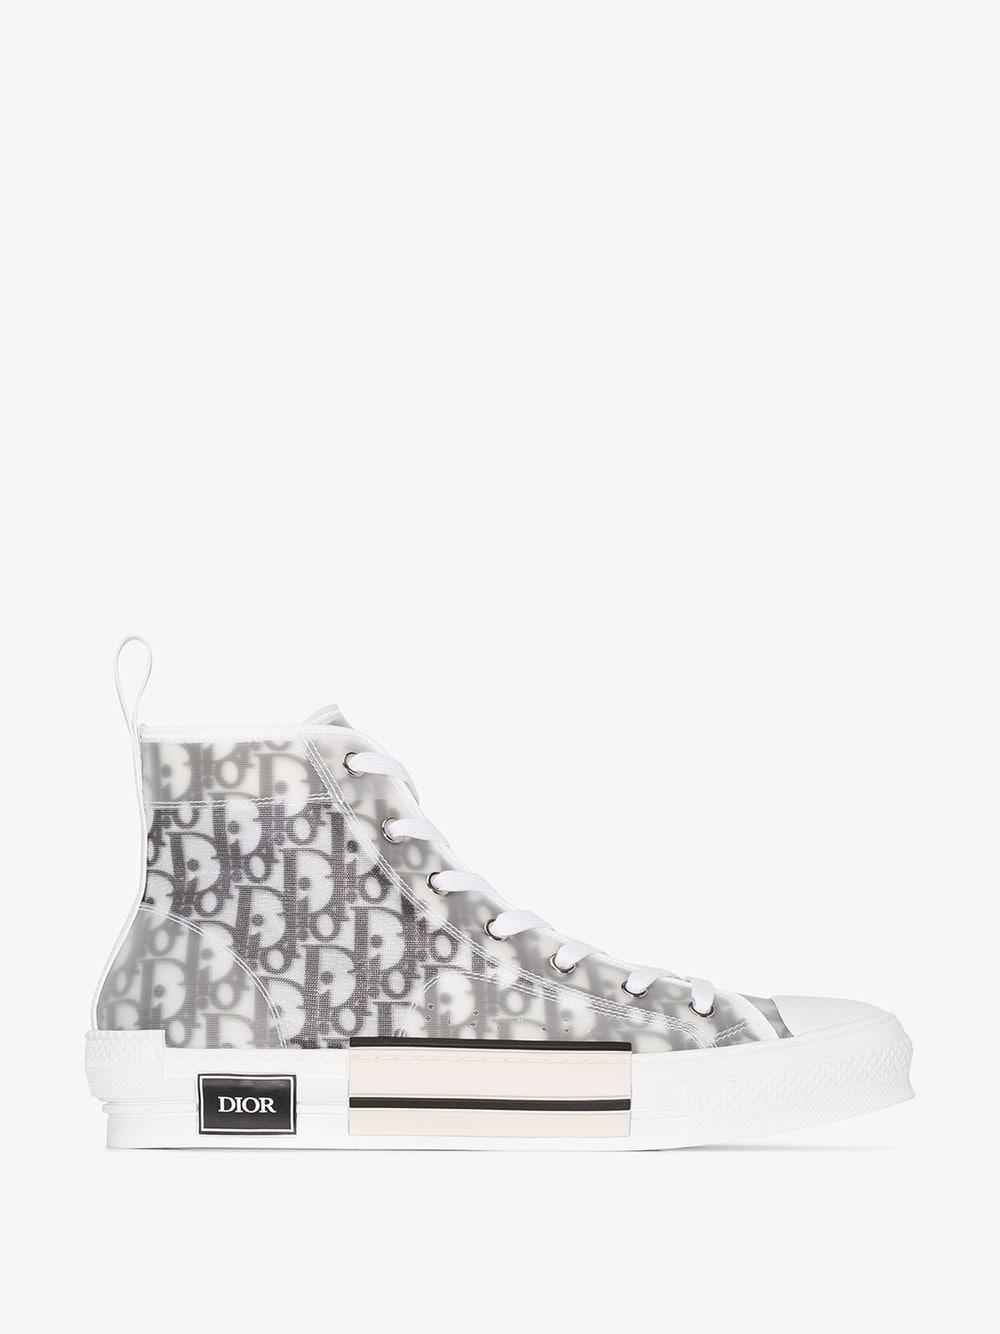 Dior Homme Leather Multicoloured B23 High Top Logo Sneakers for Men | Lyst